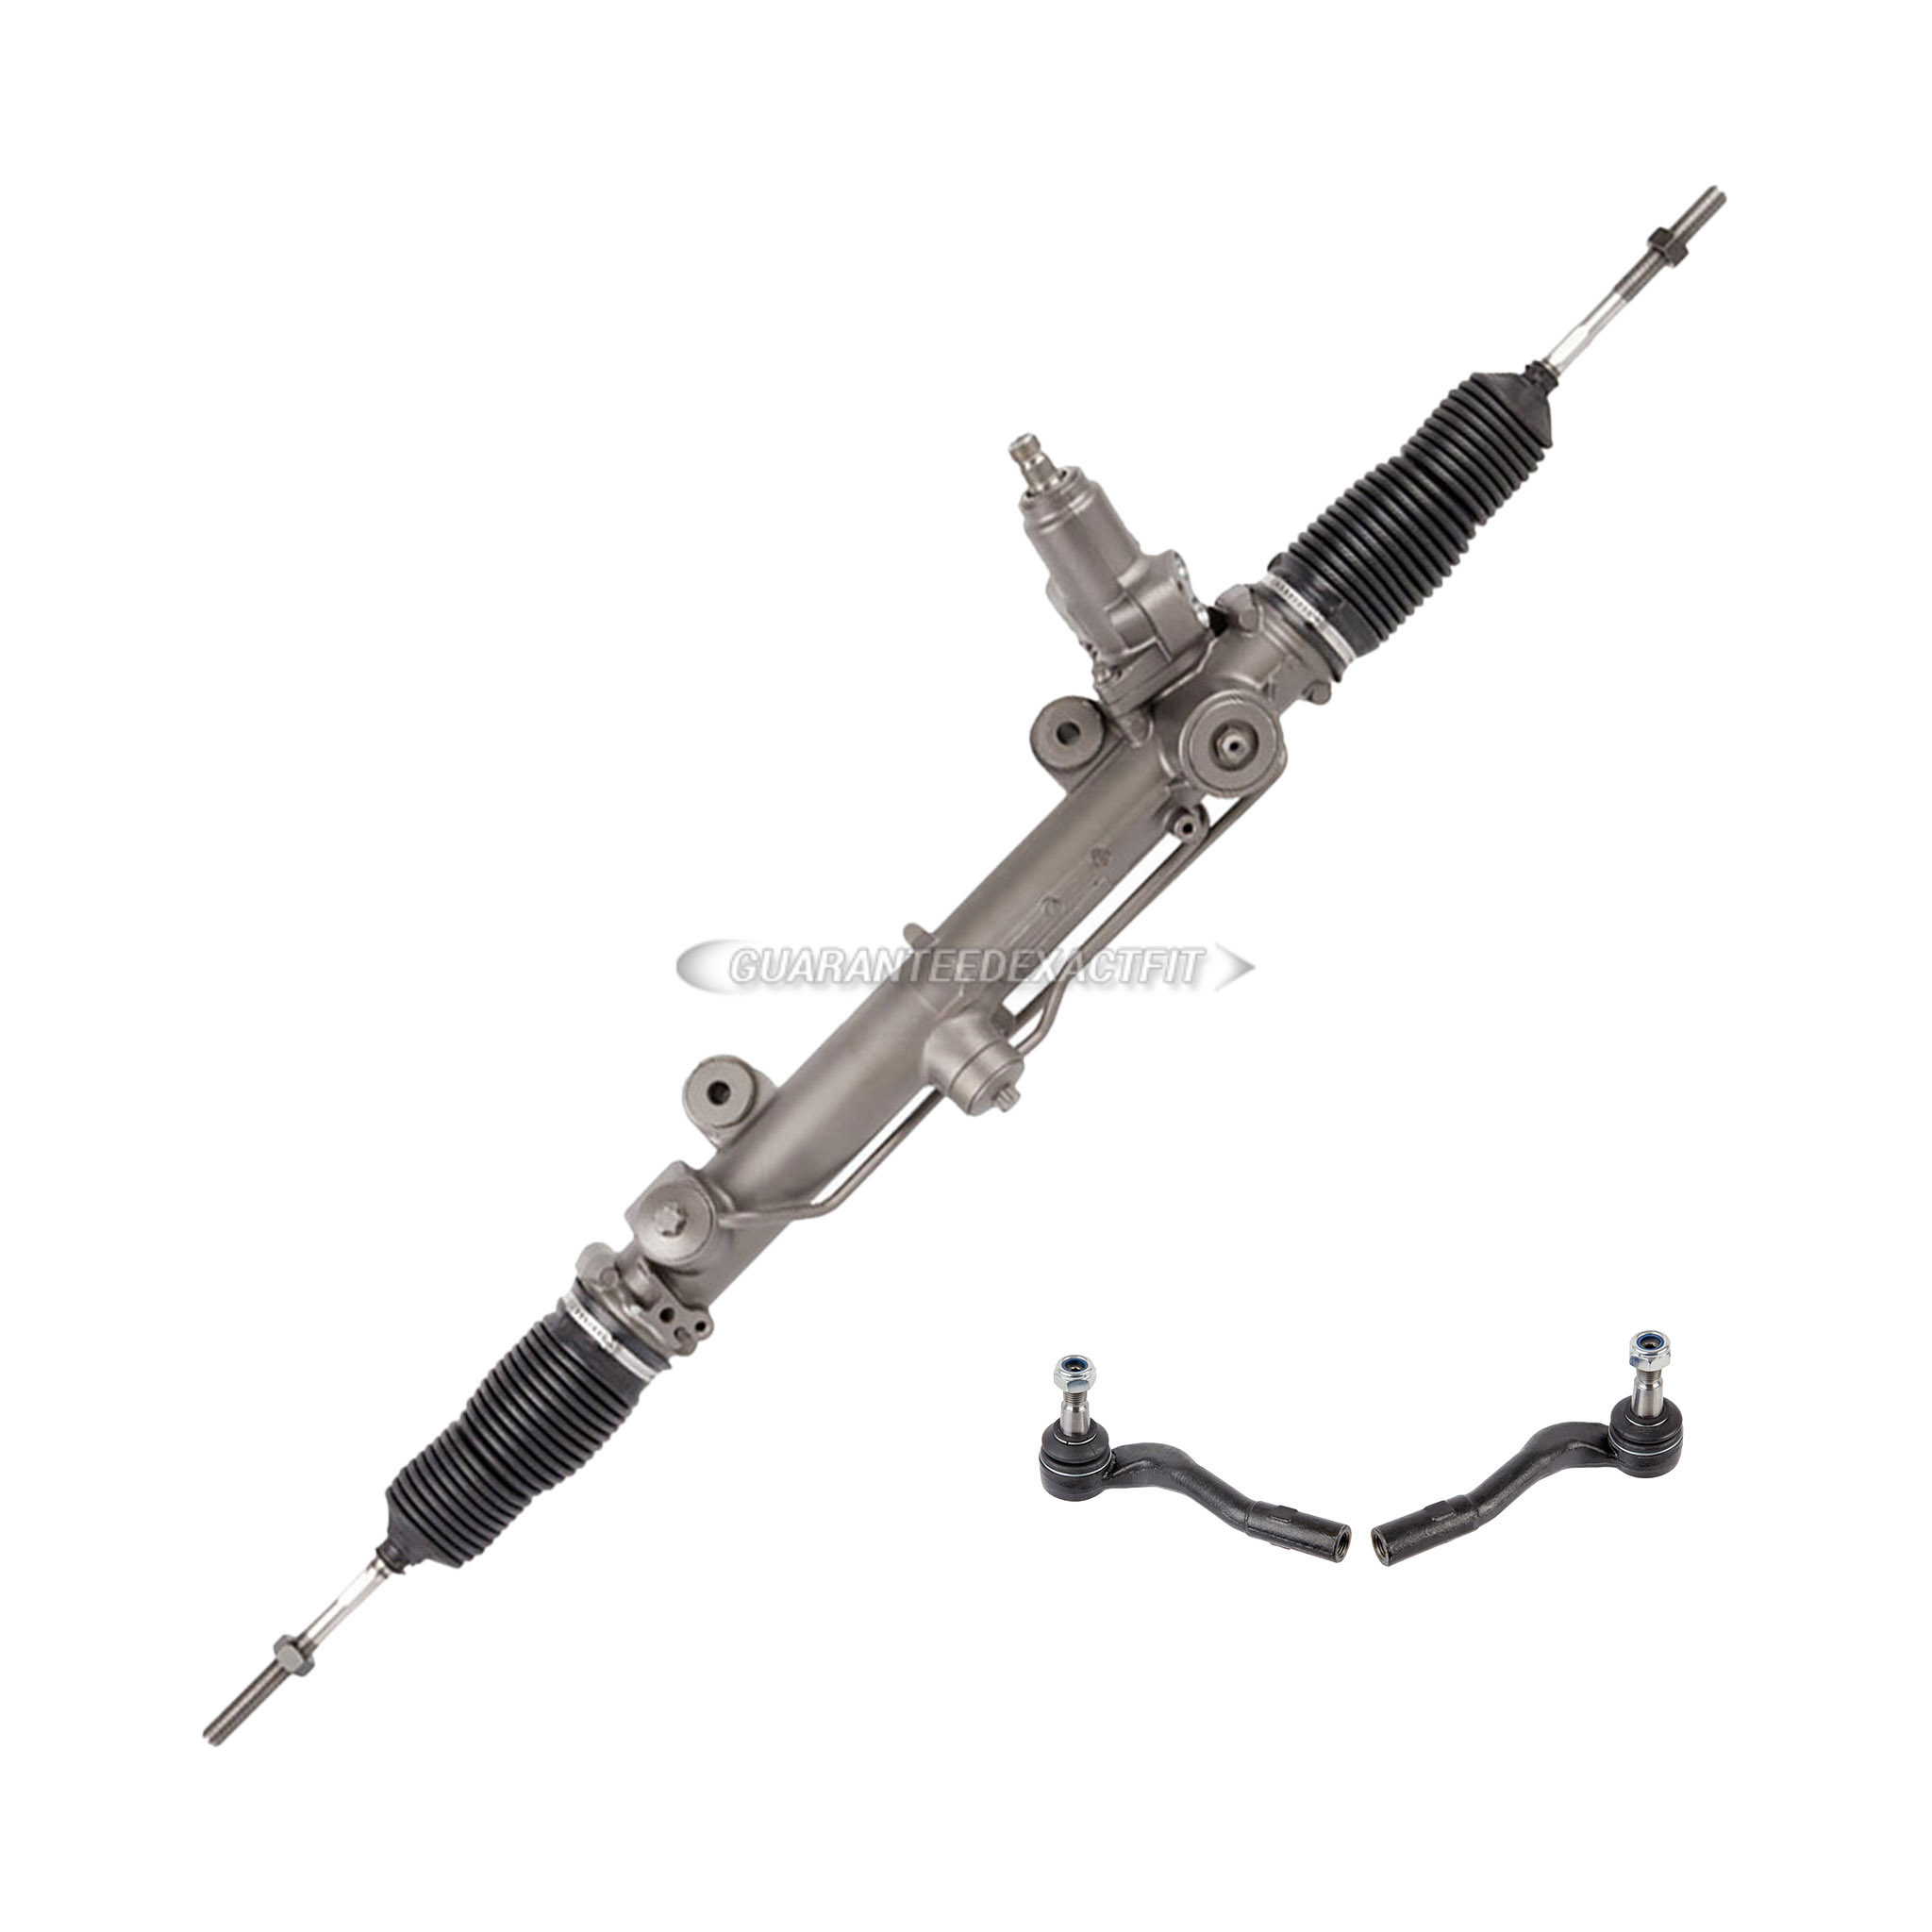  Mercedes Benz Clk350 rack and pinion and outer tie rod kit 